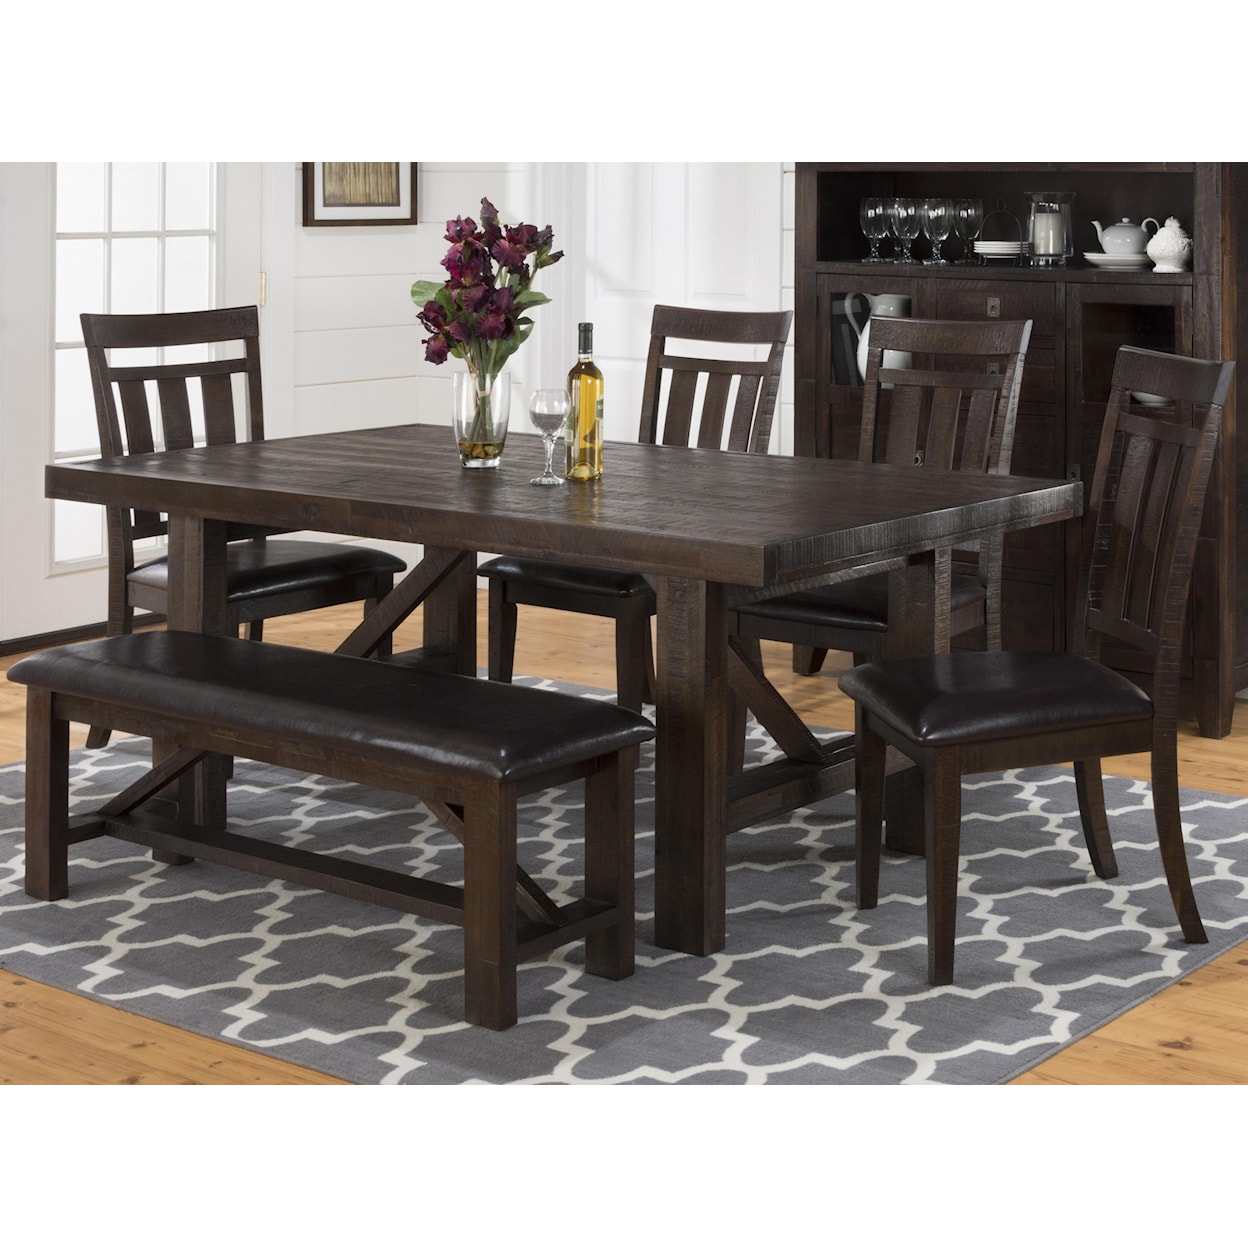 Jofran Kona Grove Dining Table, Chair and Bench Set